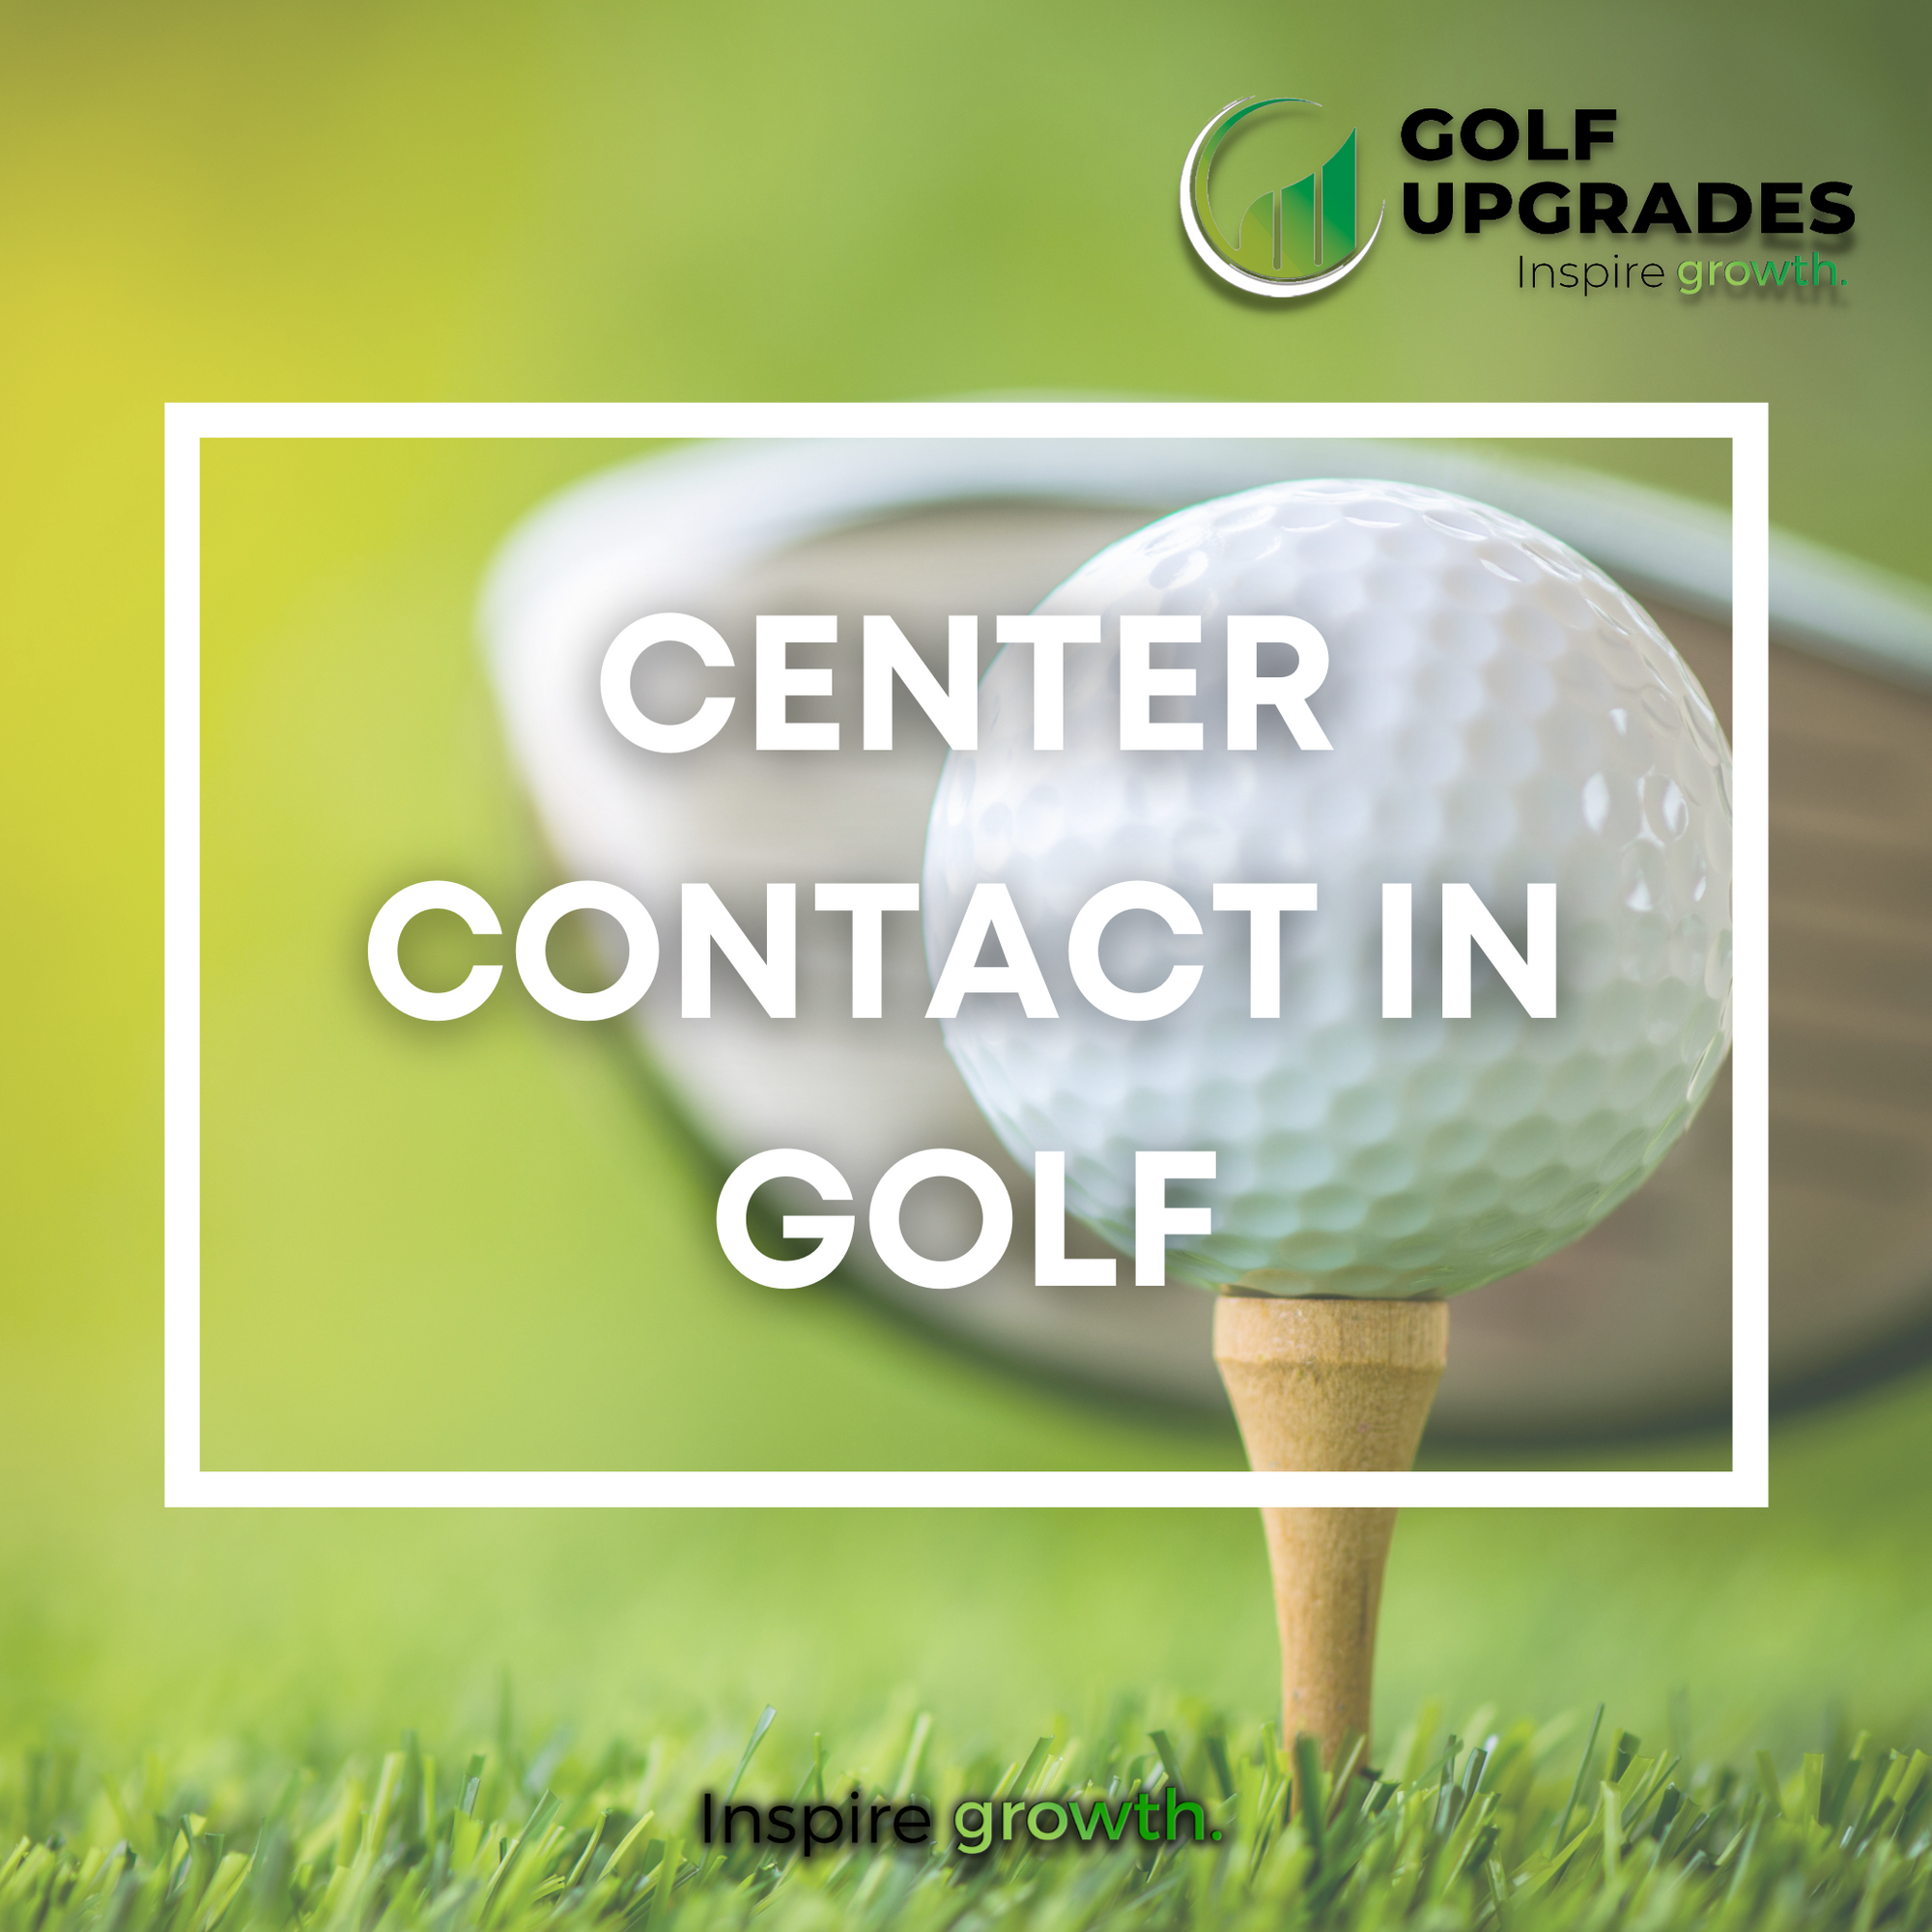 What is Center Contact/Centeredness of Contact in golf?